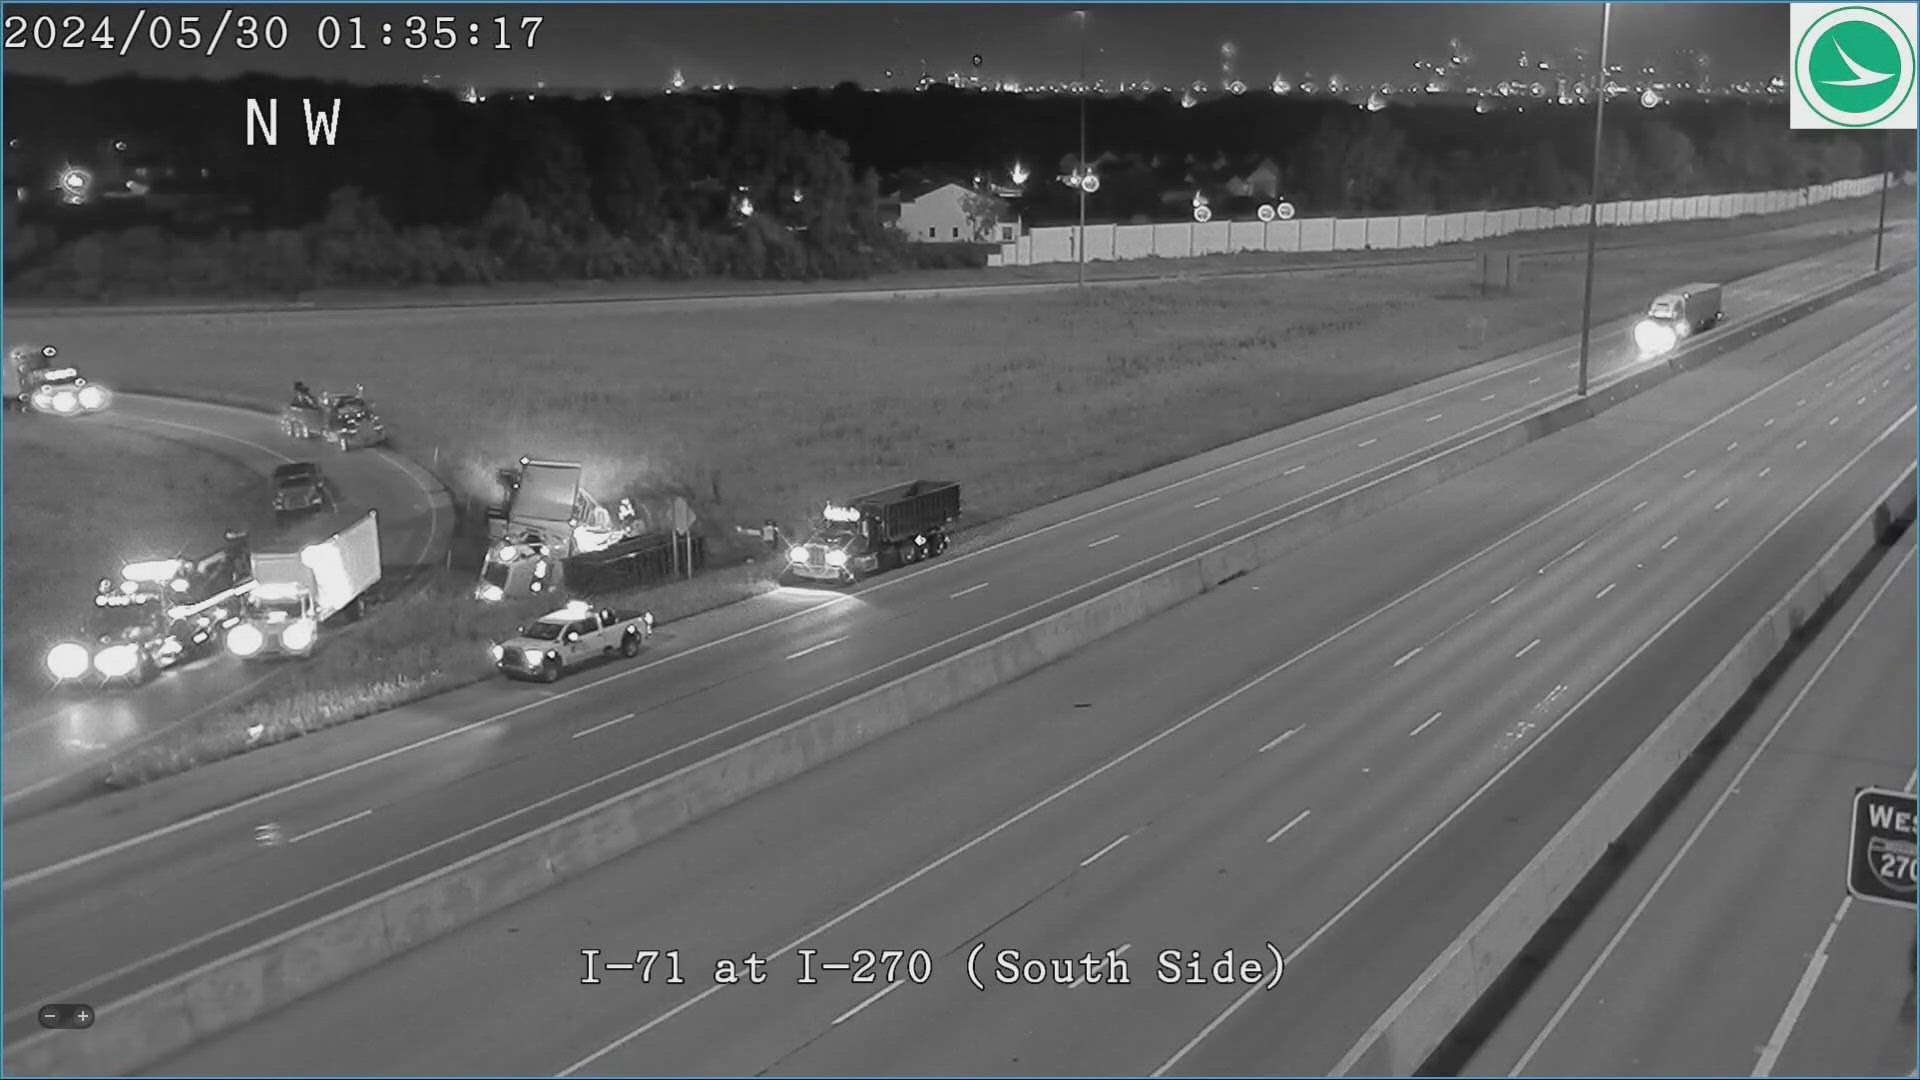 The Franklin County Sheriff's Office said the crash happened after 8 p.m. on the ramp from Interstate 270 west to Interstate 71 south.